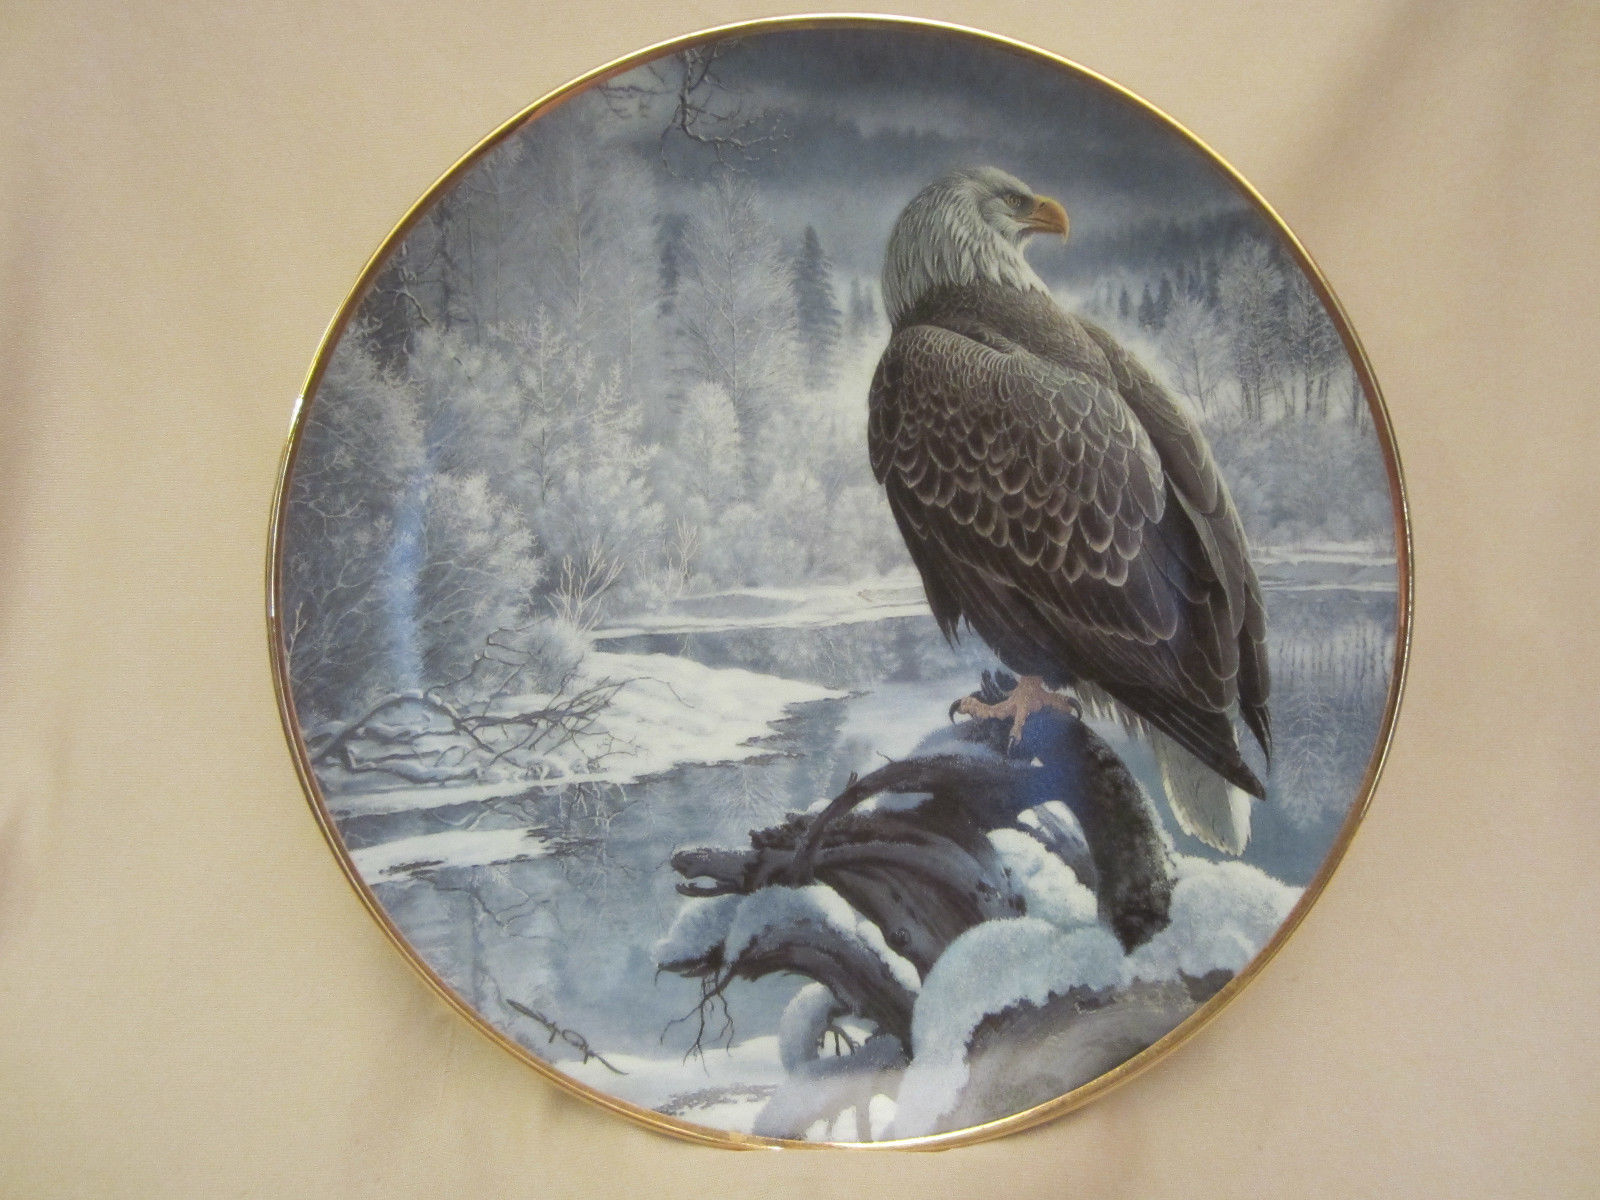 WINTER IN THE VALLEY collector plate BALD EAGLE John Pitcher HAMILTON Seasons - $39.99